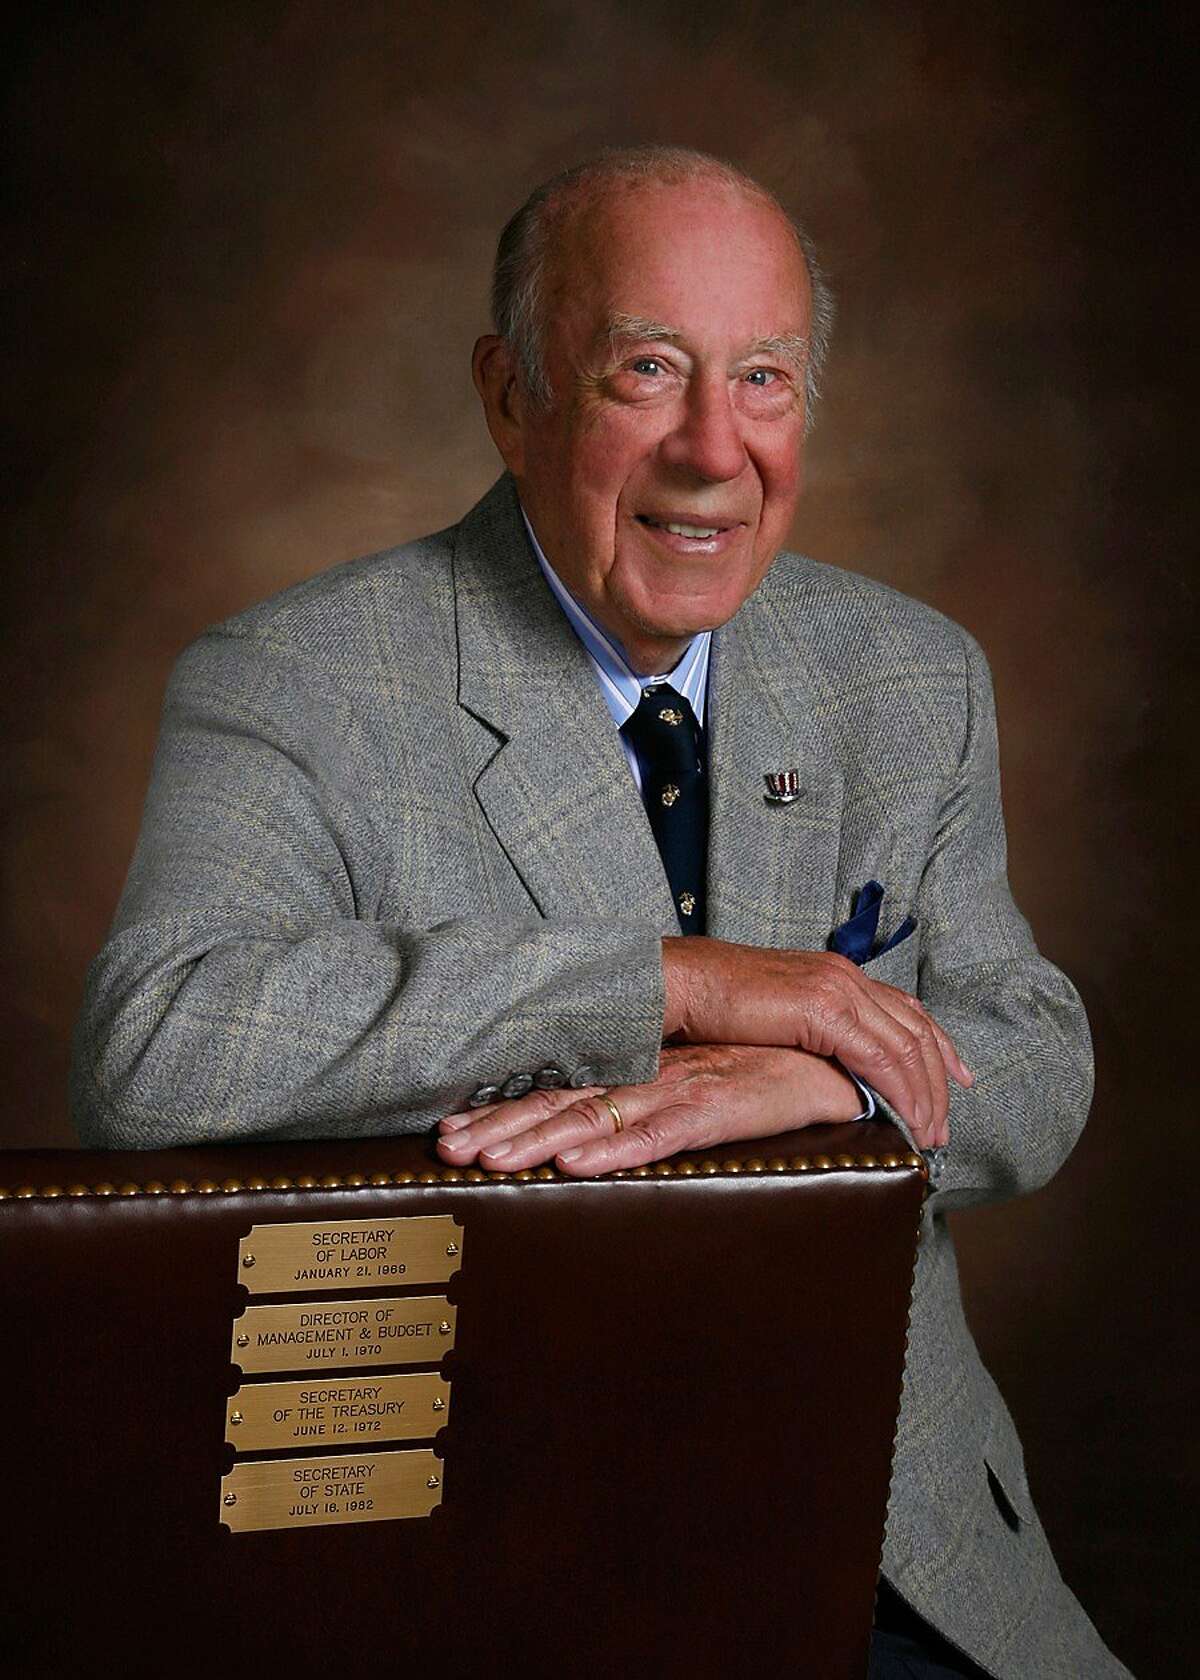 Former Secretary of State George Shultz poses in his Cabinet chair in 2011. (Michael Mustacchi)